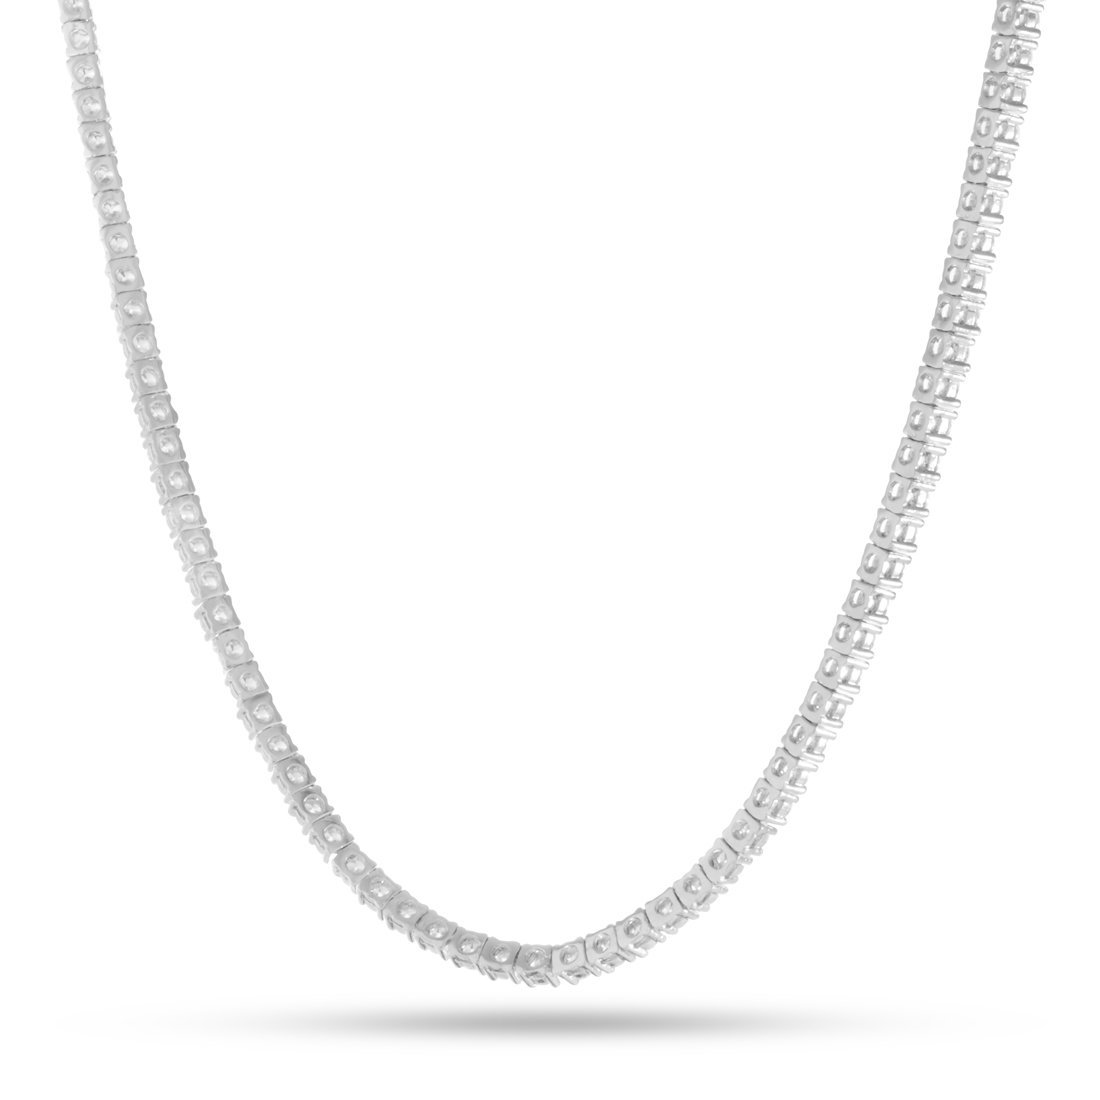 NIV'S BLING - 5mm Lab Diamond Tennis Chain for Men and Women | 18k Gold  Plated 1 Row CZ Necklace : Amazon.in: Fashion